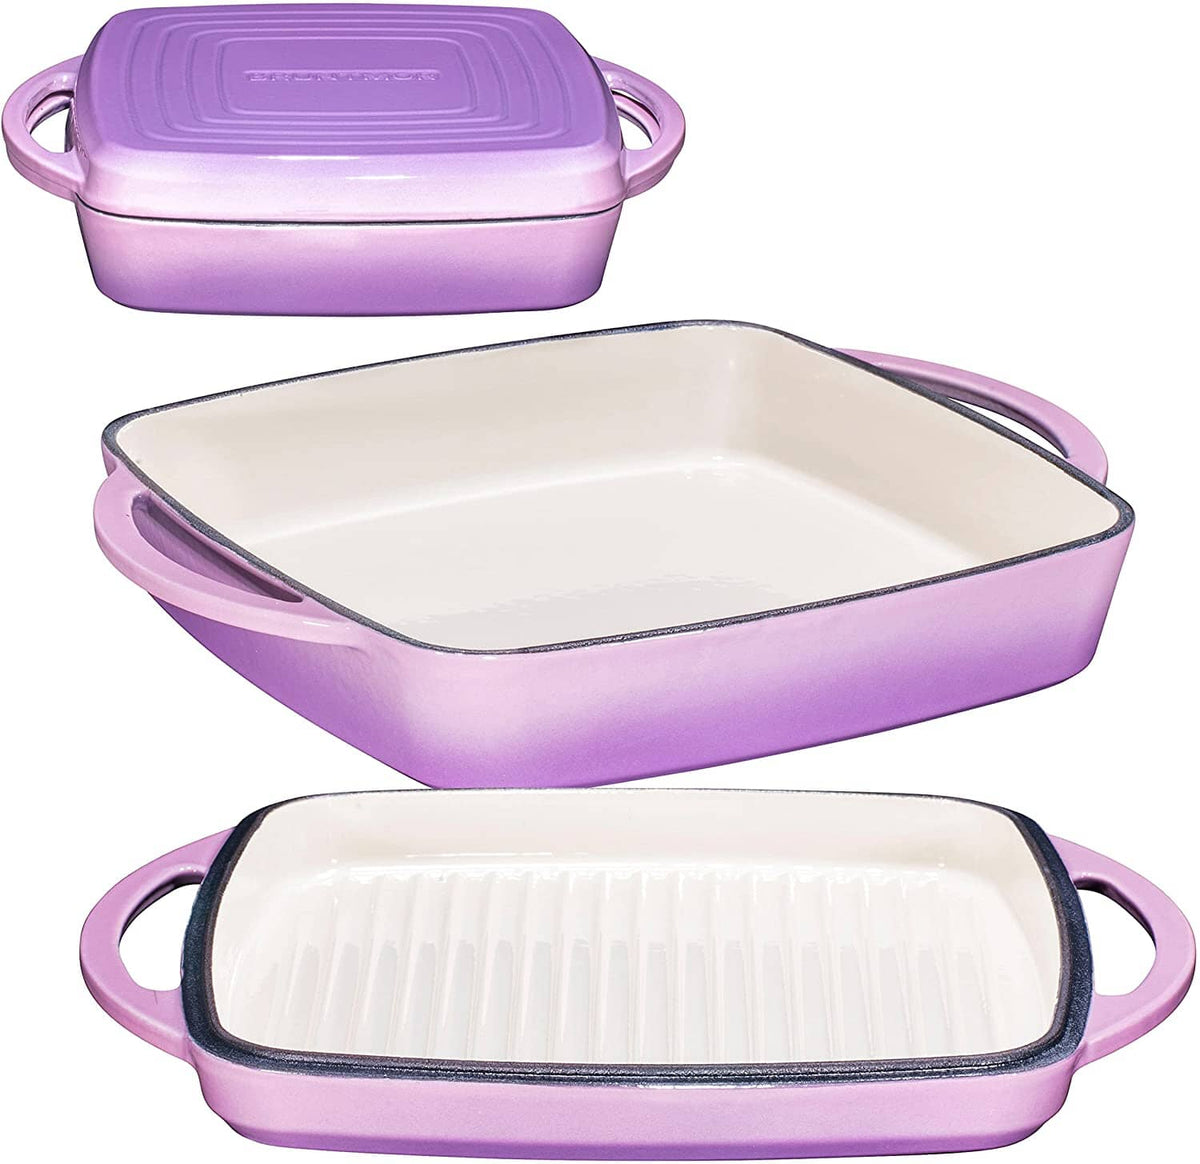 Enameled Square Cast Iron Baking Pan with Grill Lid